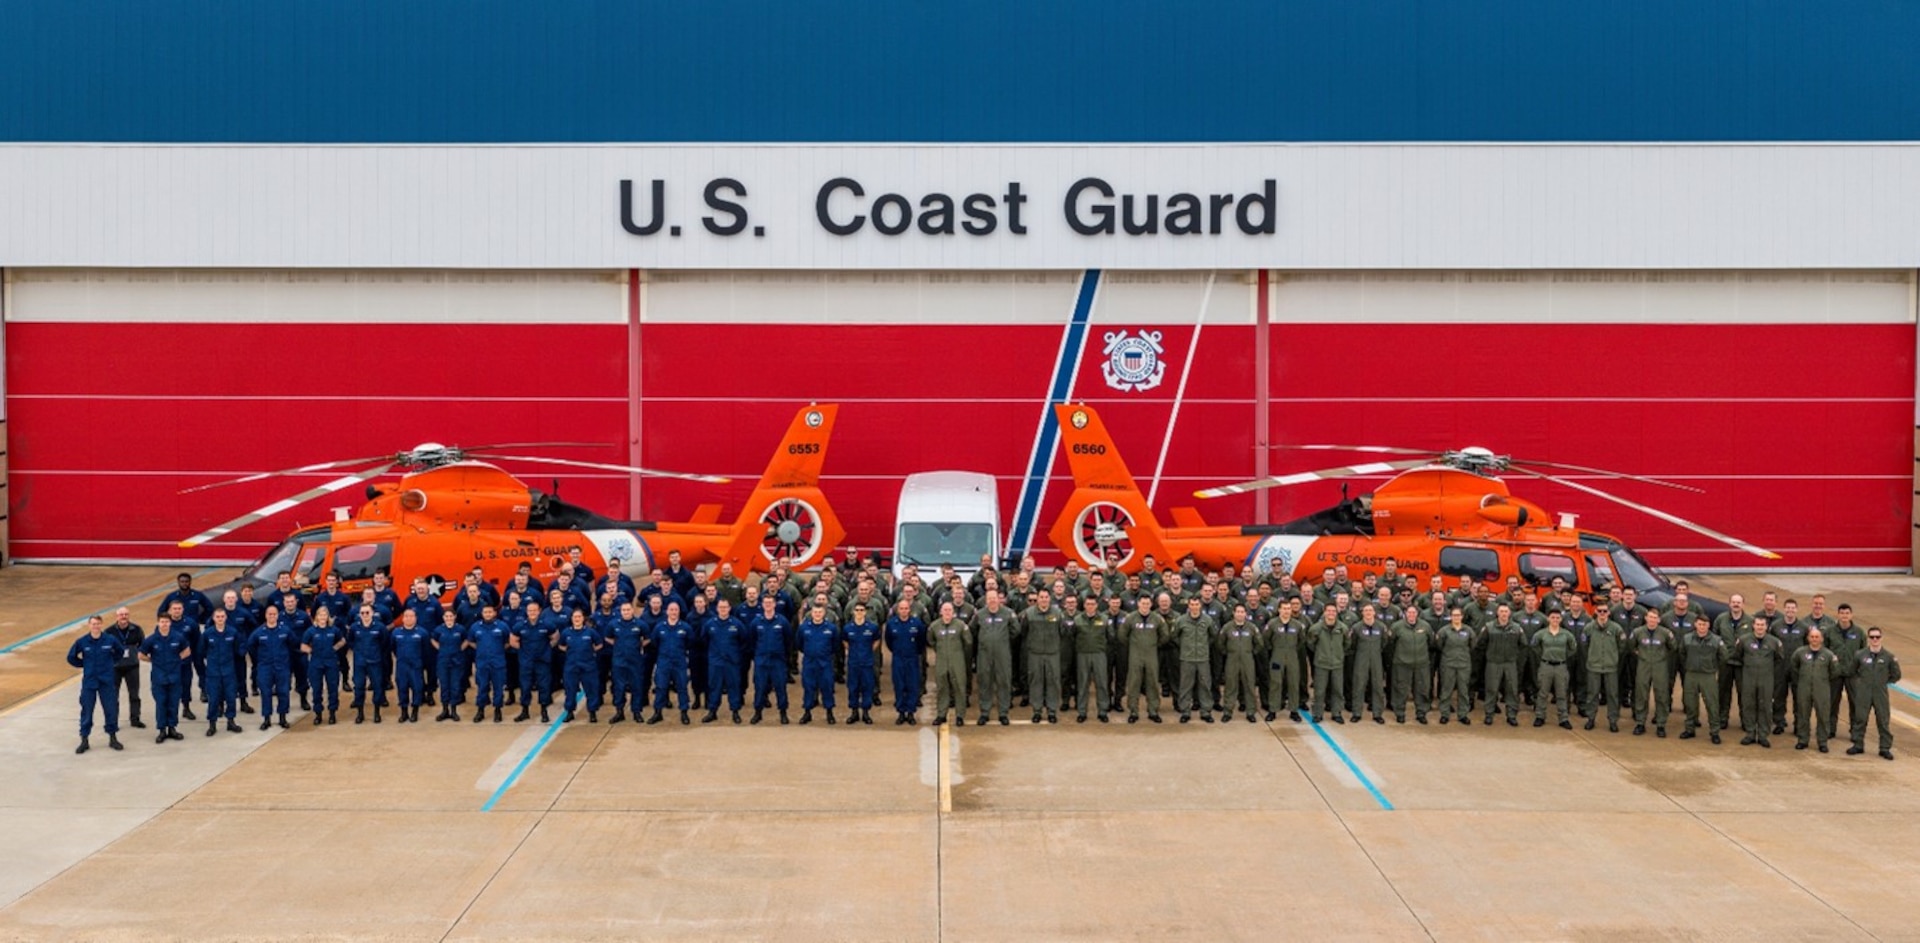 The crew of U.S. Coast Guard Air Station Atlantic City pose for a New Year’s 2023 photograph.